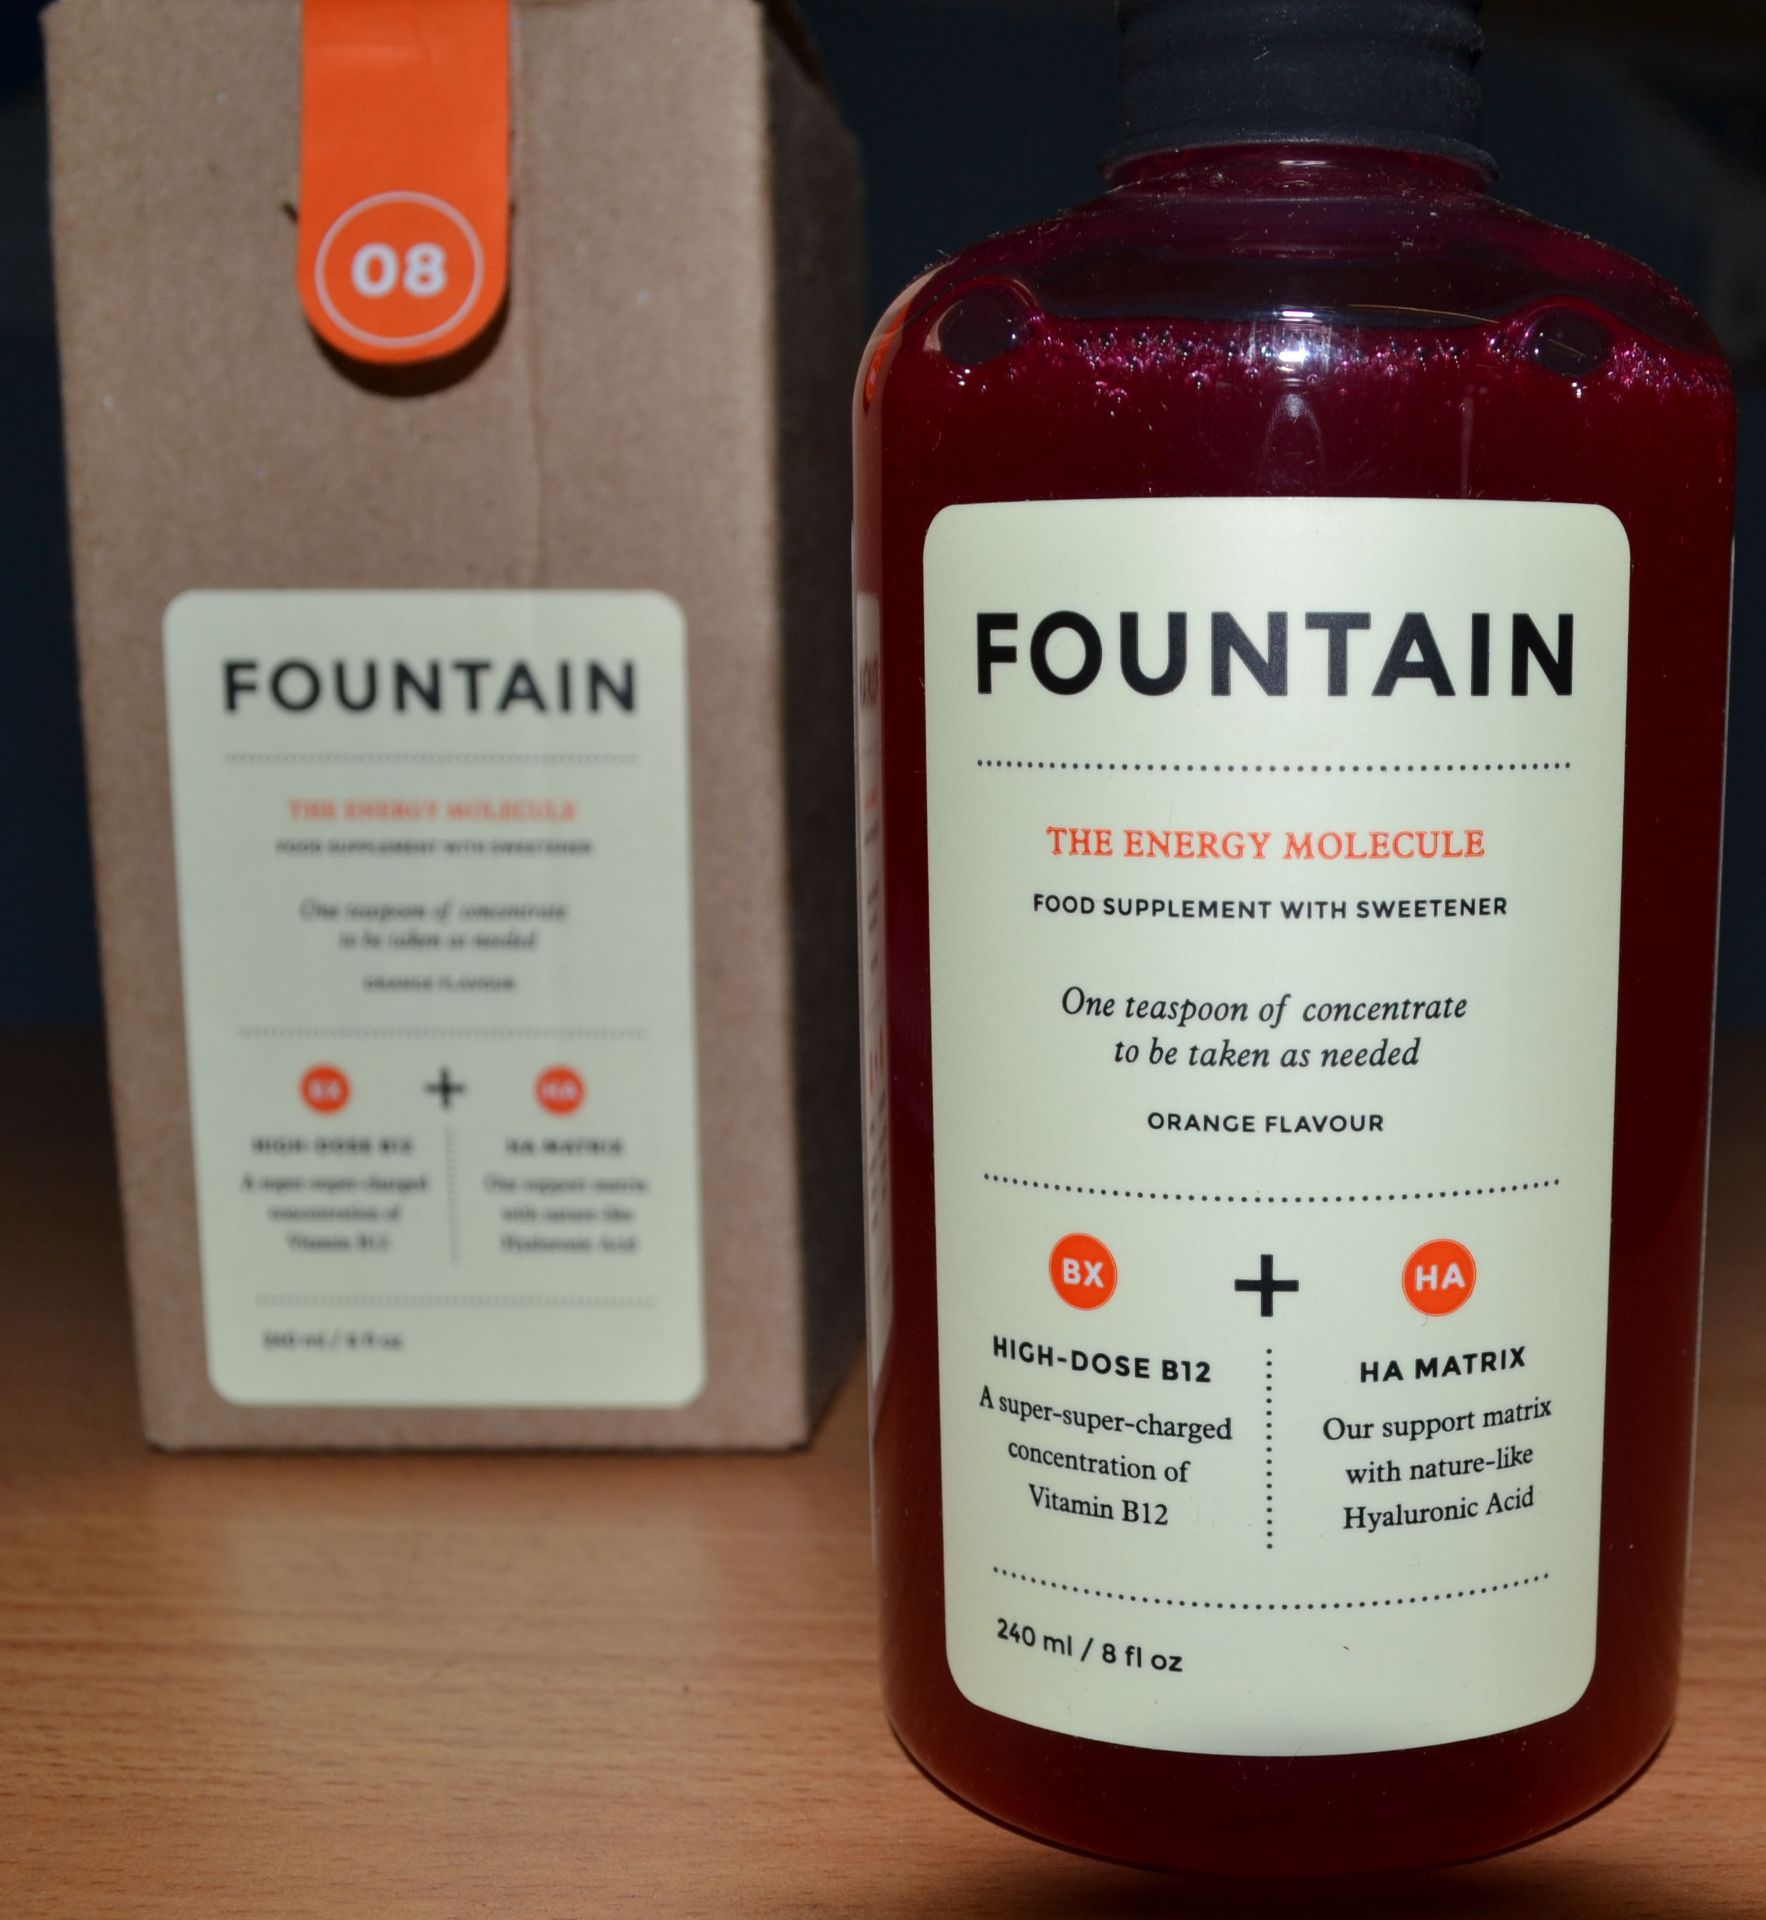 10 x 240ml Bottles of Fountain, The Energy Molecule Supplement - New & Boxed - CL185 - Ref: DRT0643 - Image 2 of 7